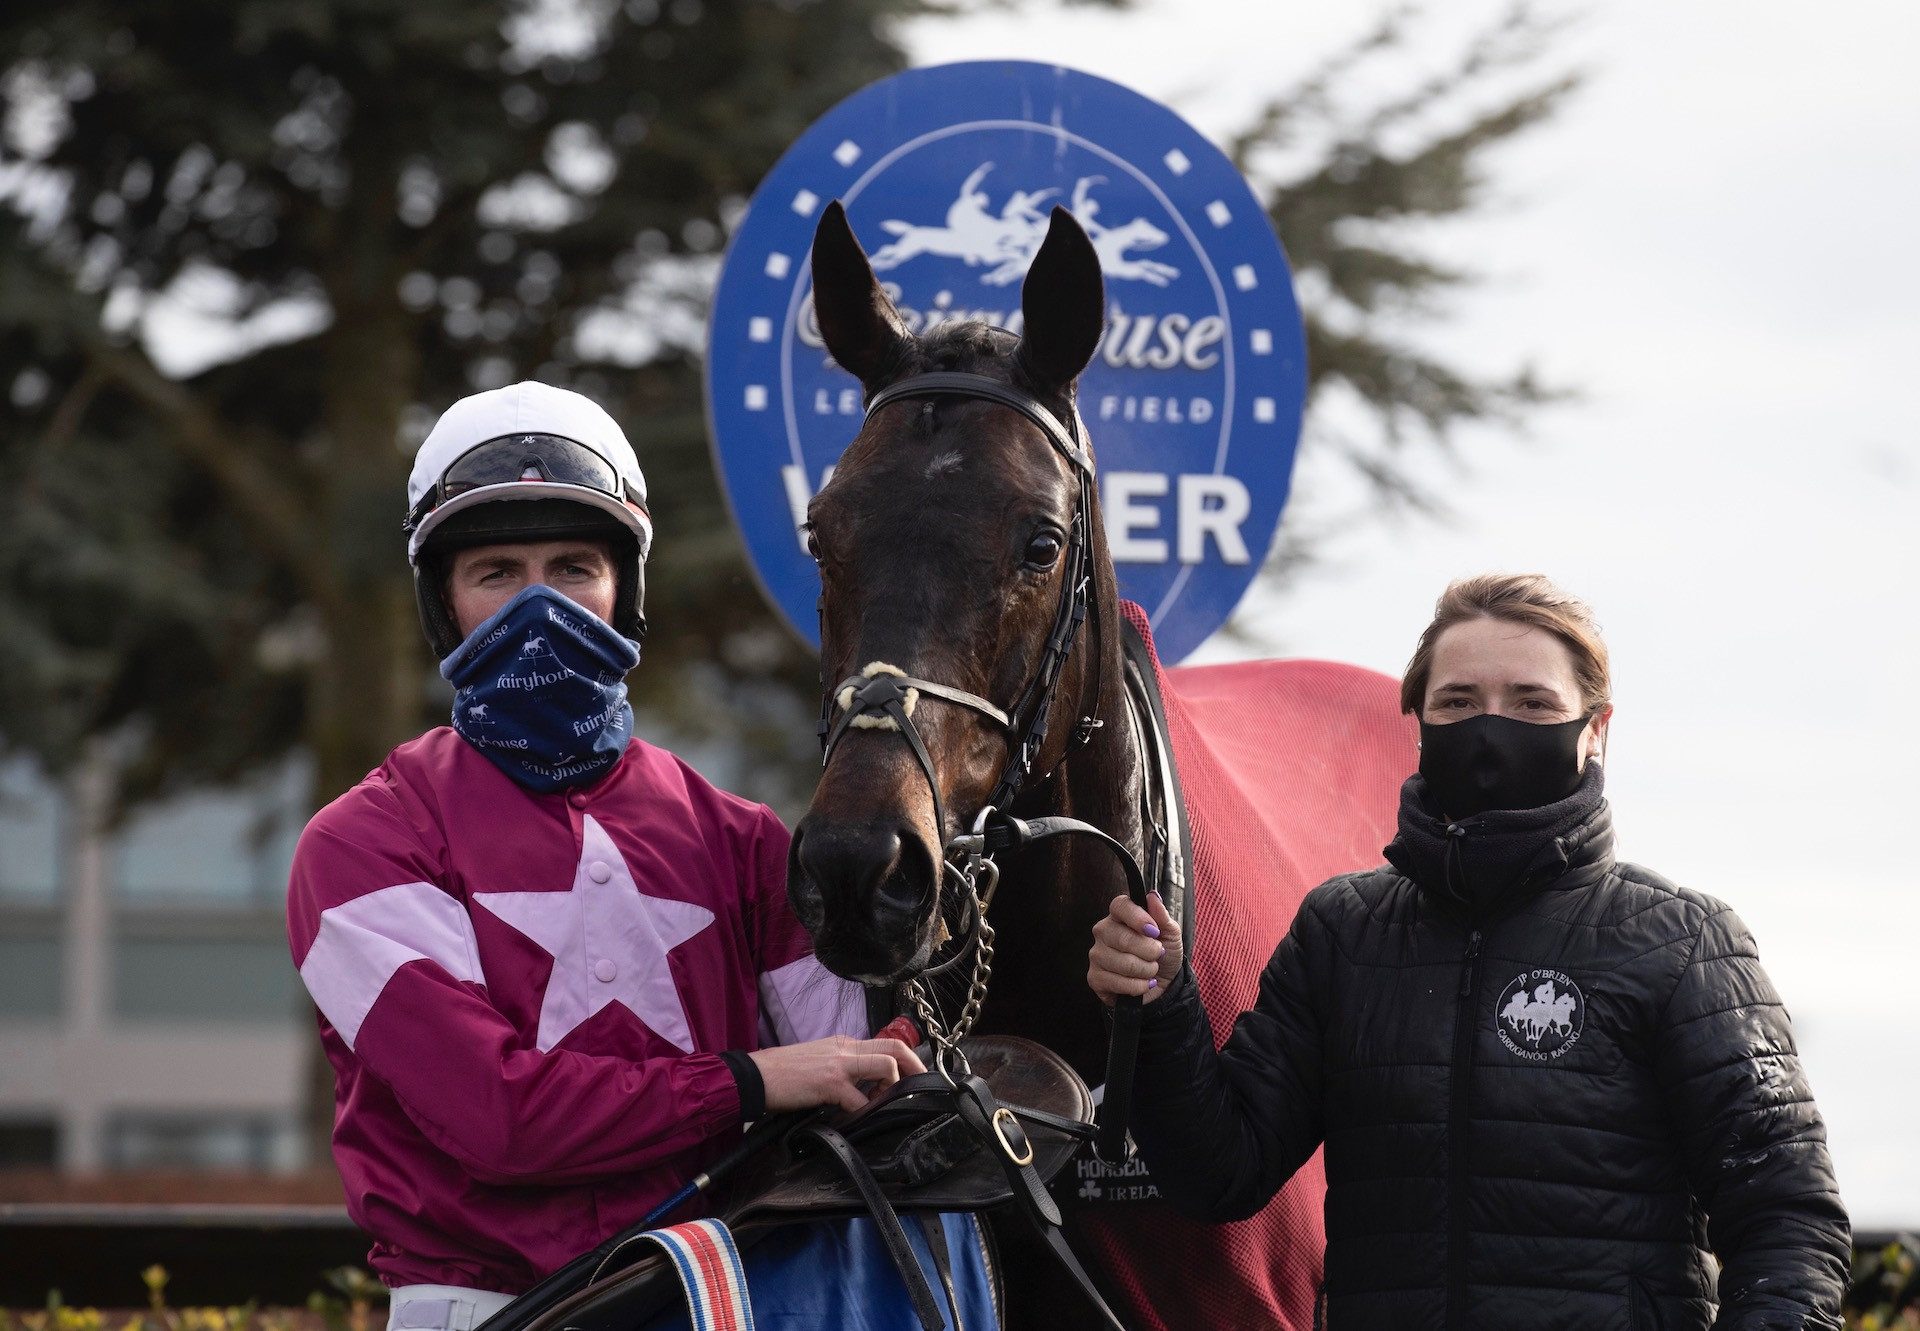 Star Max (Maxios) Wins The Beginners Chase At Fairyhouse